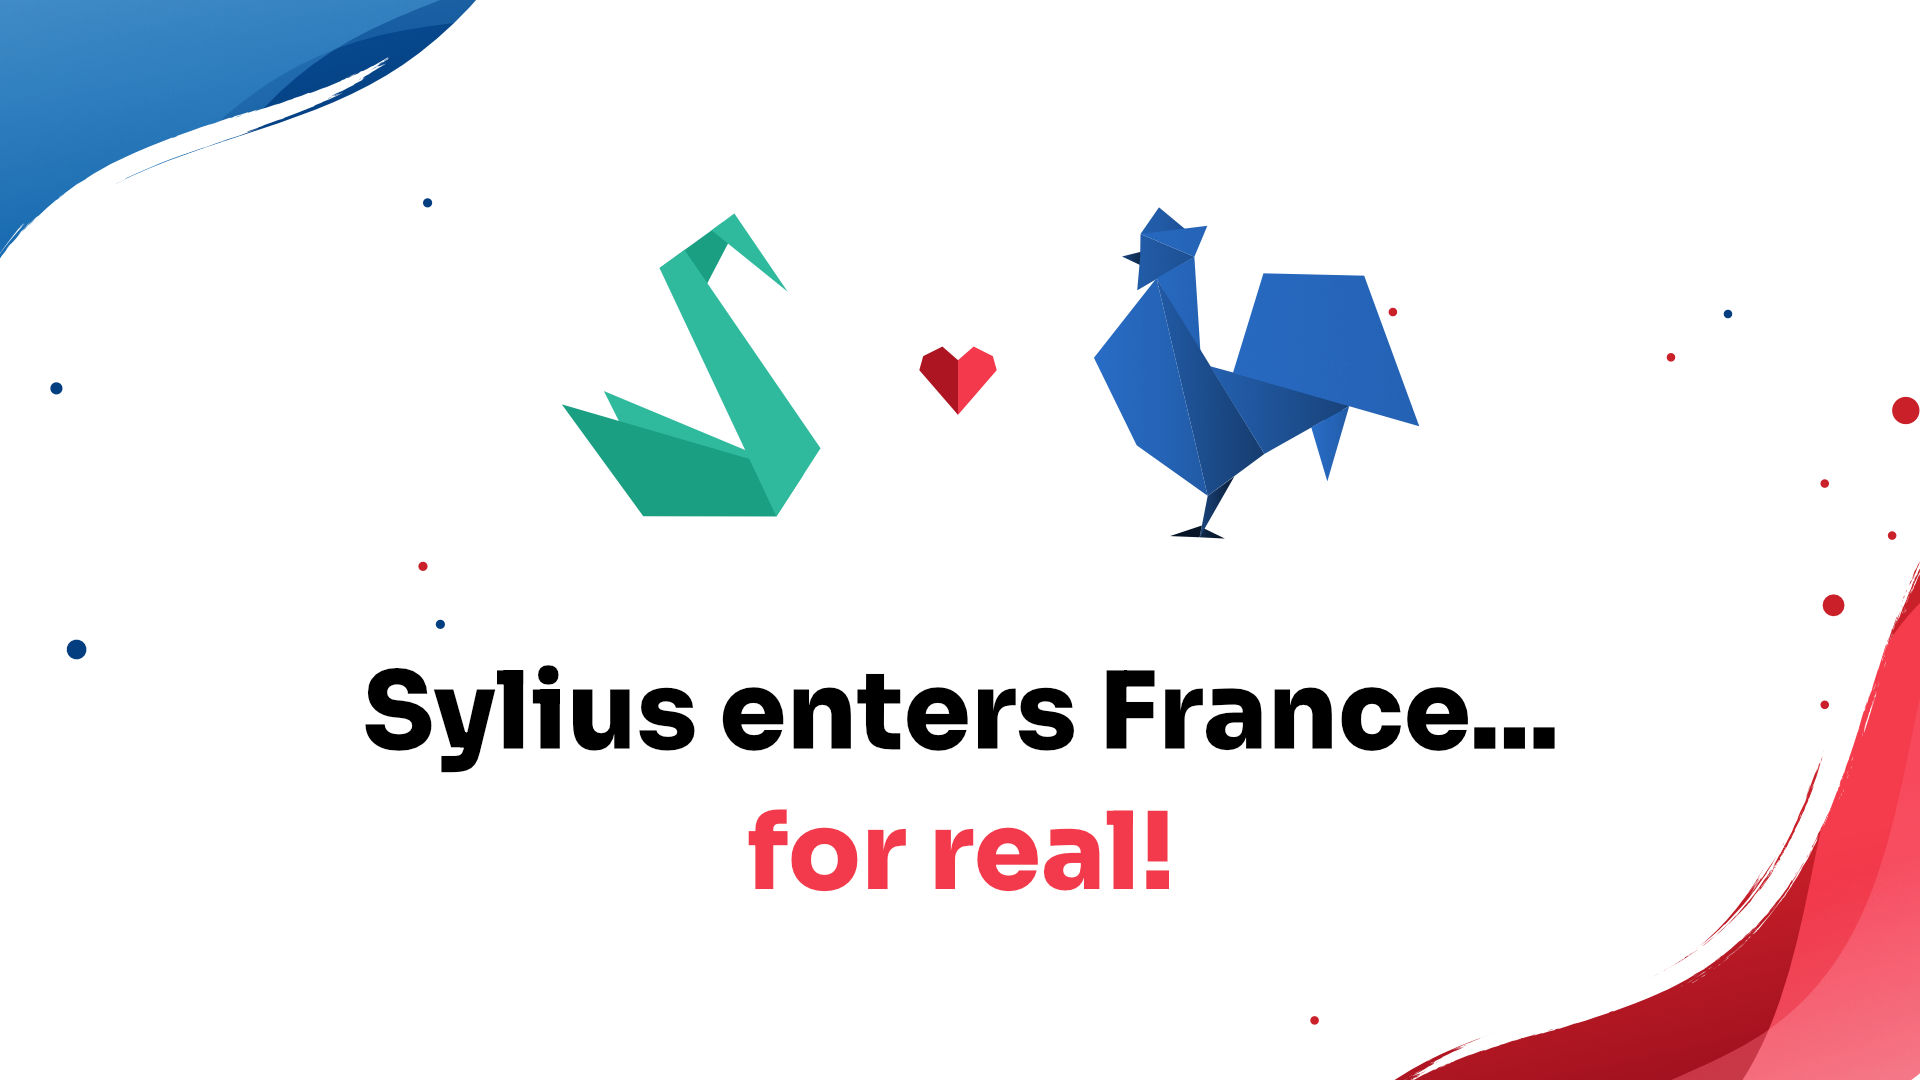 When a swan meets a rooster – Sylius opens a new office in France